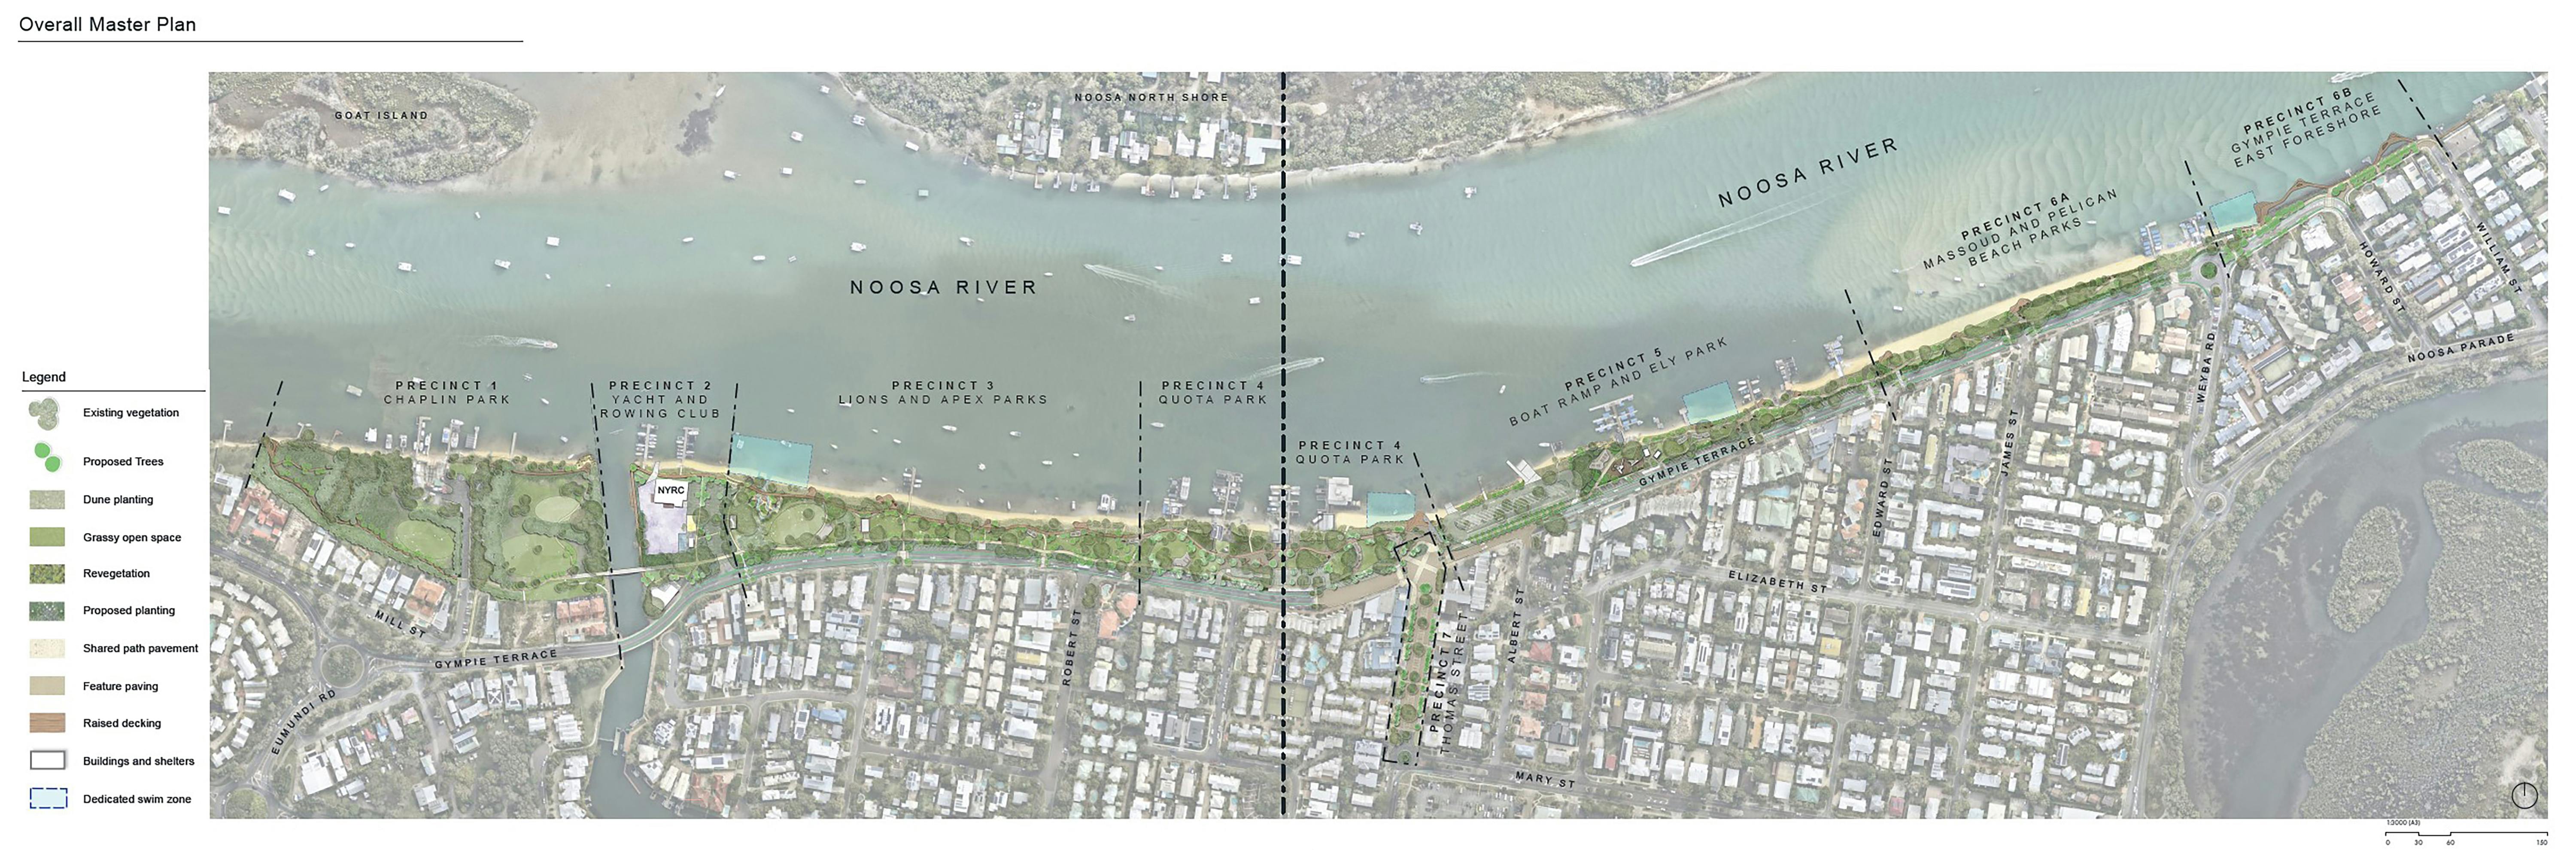 Master Plan for the Noosaville Foreshore